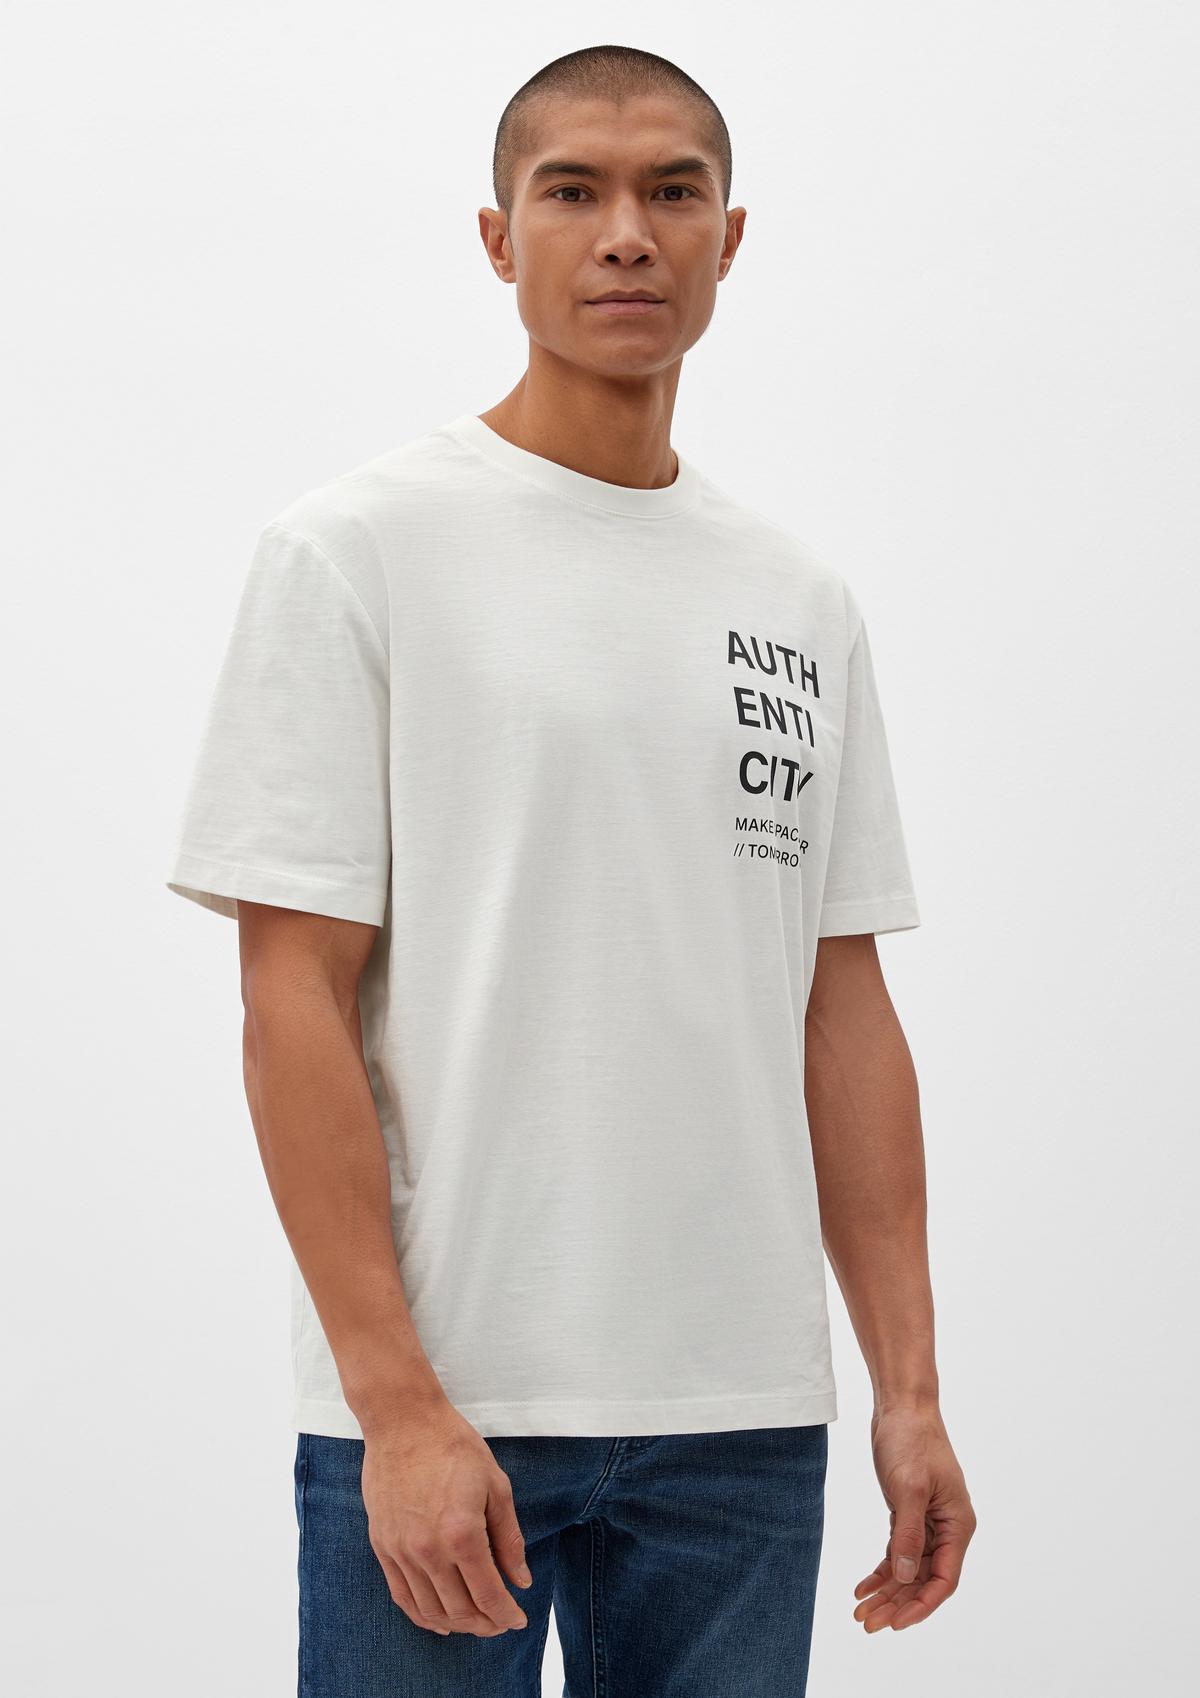 T-shirt with white - print front a